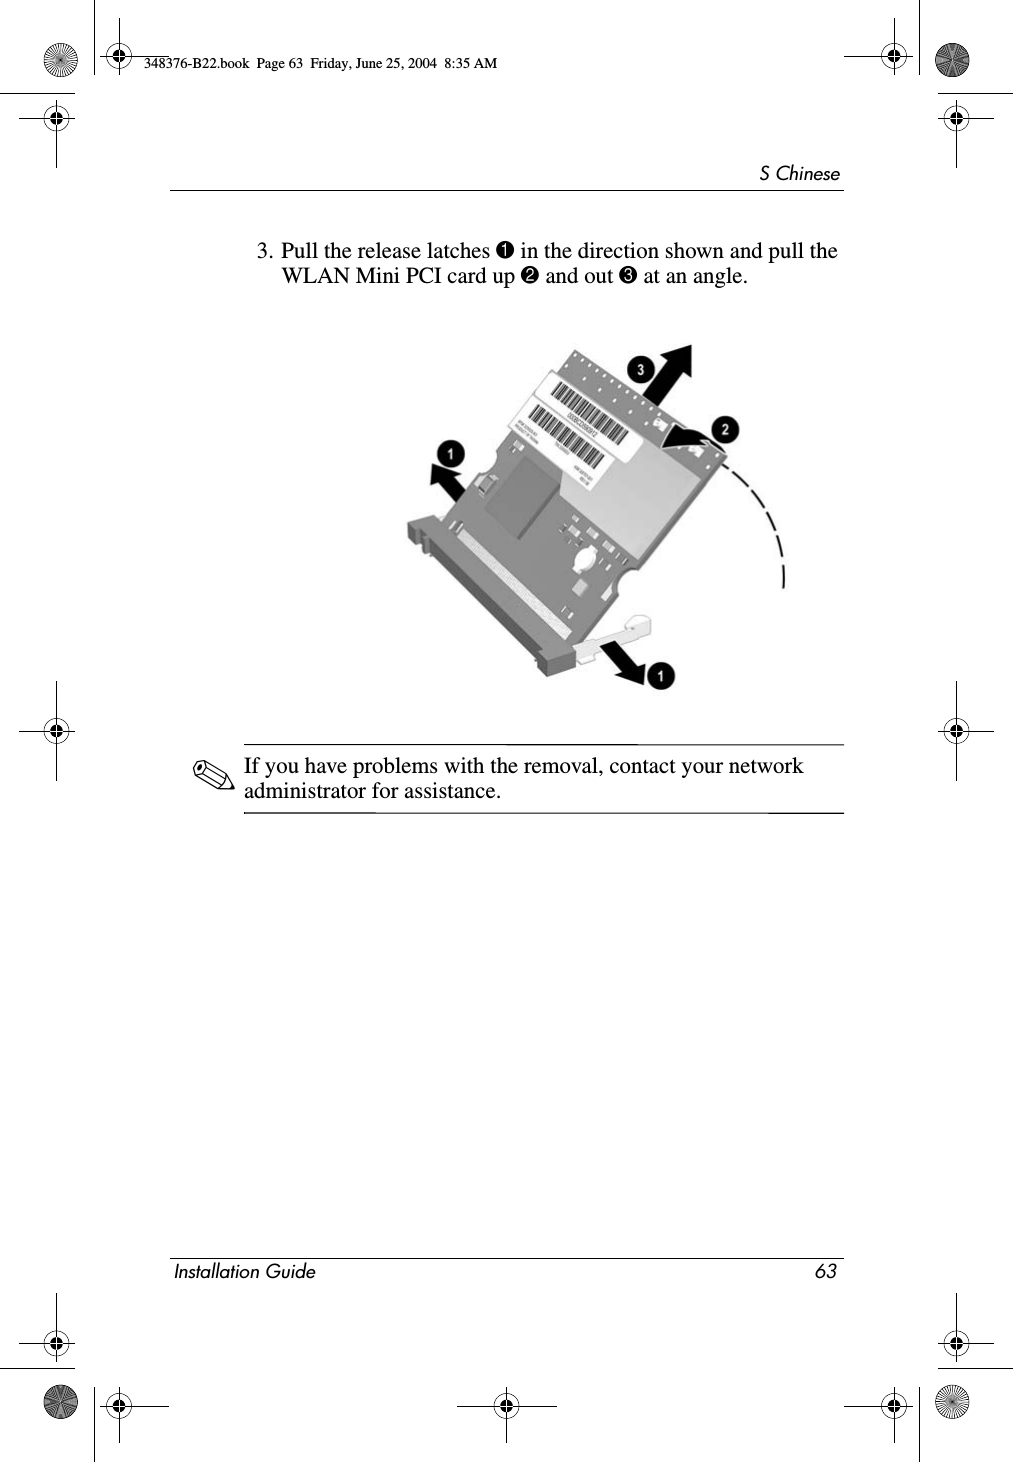 S ChineseInstallation Guide 633. Pull the release latches 1 in the direction shown and pull the WLAN Mini PCI card up 2 and out 3 at an angle.✎If you have problems with the removal, contact your network administrator for assistance.348376-B22.book  Page 63  Friday, June 25, 2004  8:35 AM